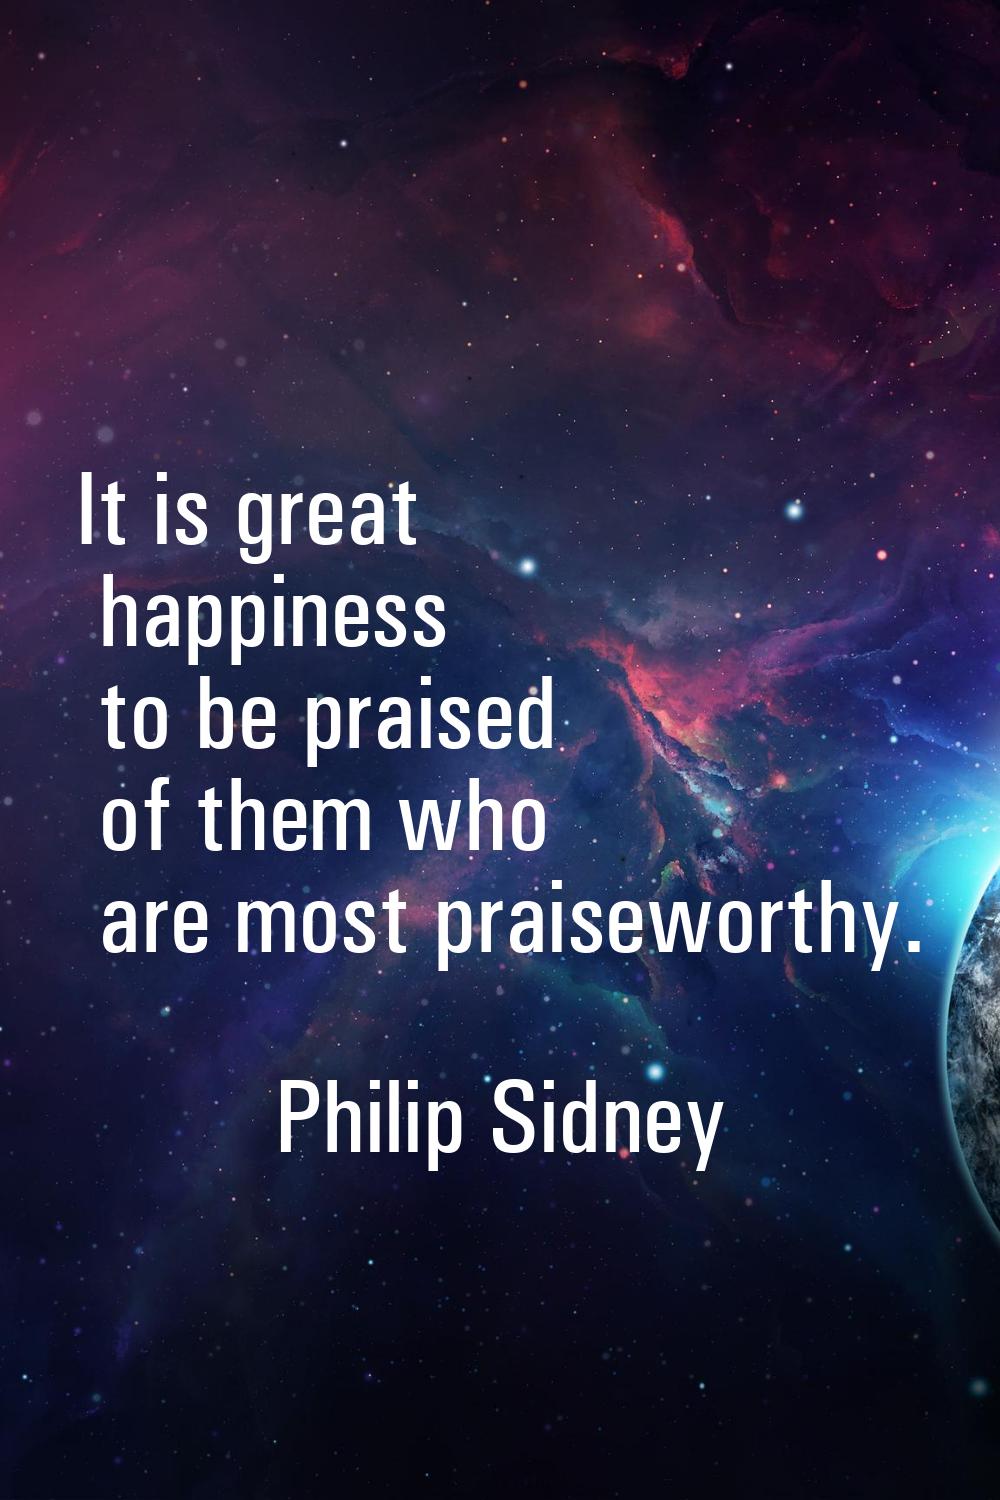 It is great happiness to be praised of them who are most praiseworthy.